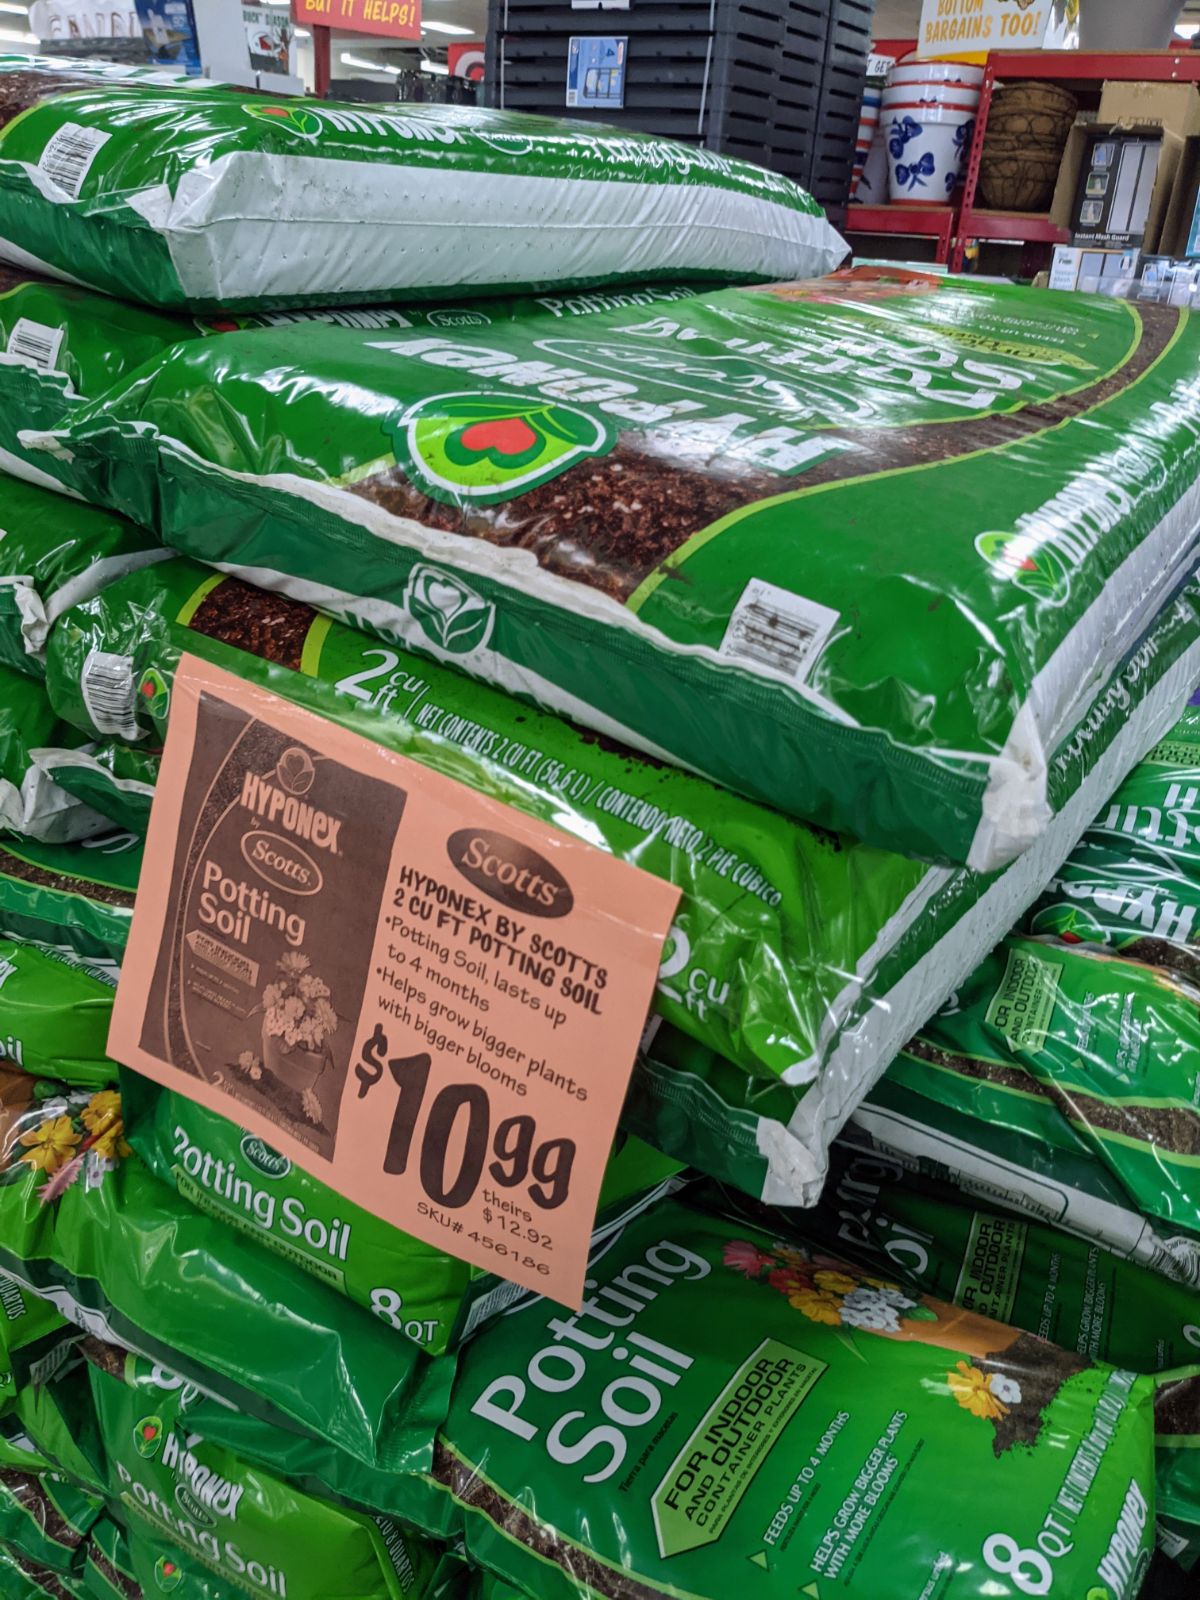 Ollies potting soil options also include the larger bag of Hyponex Potting Soil for $10.99